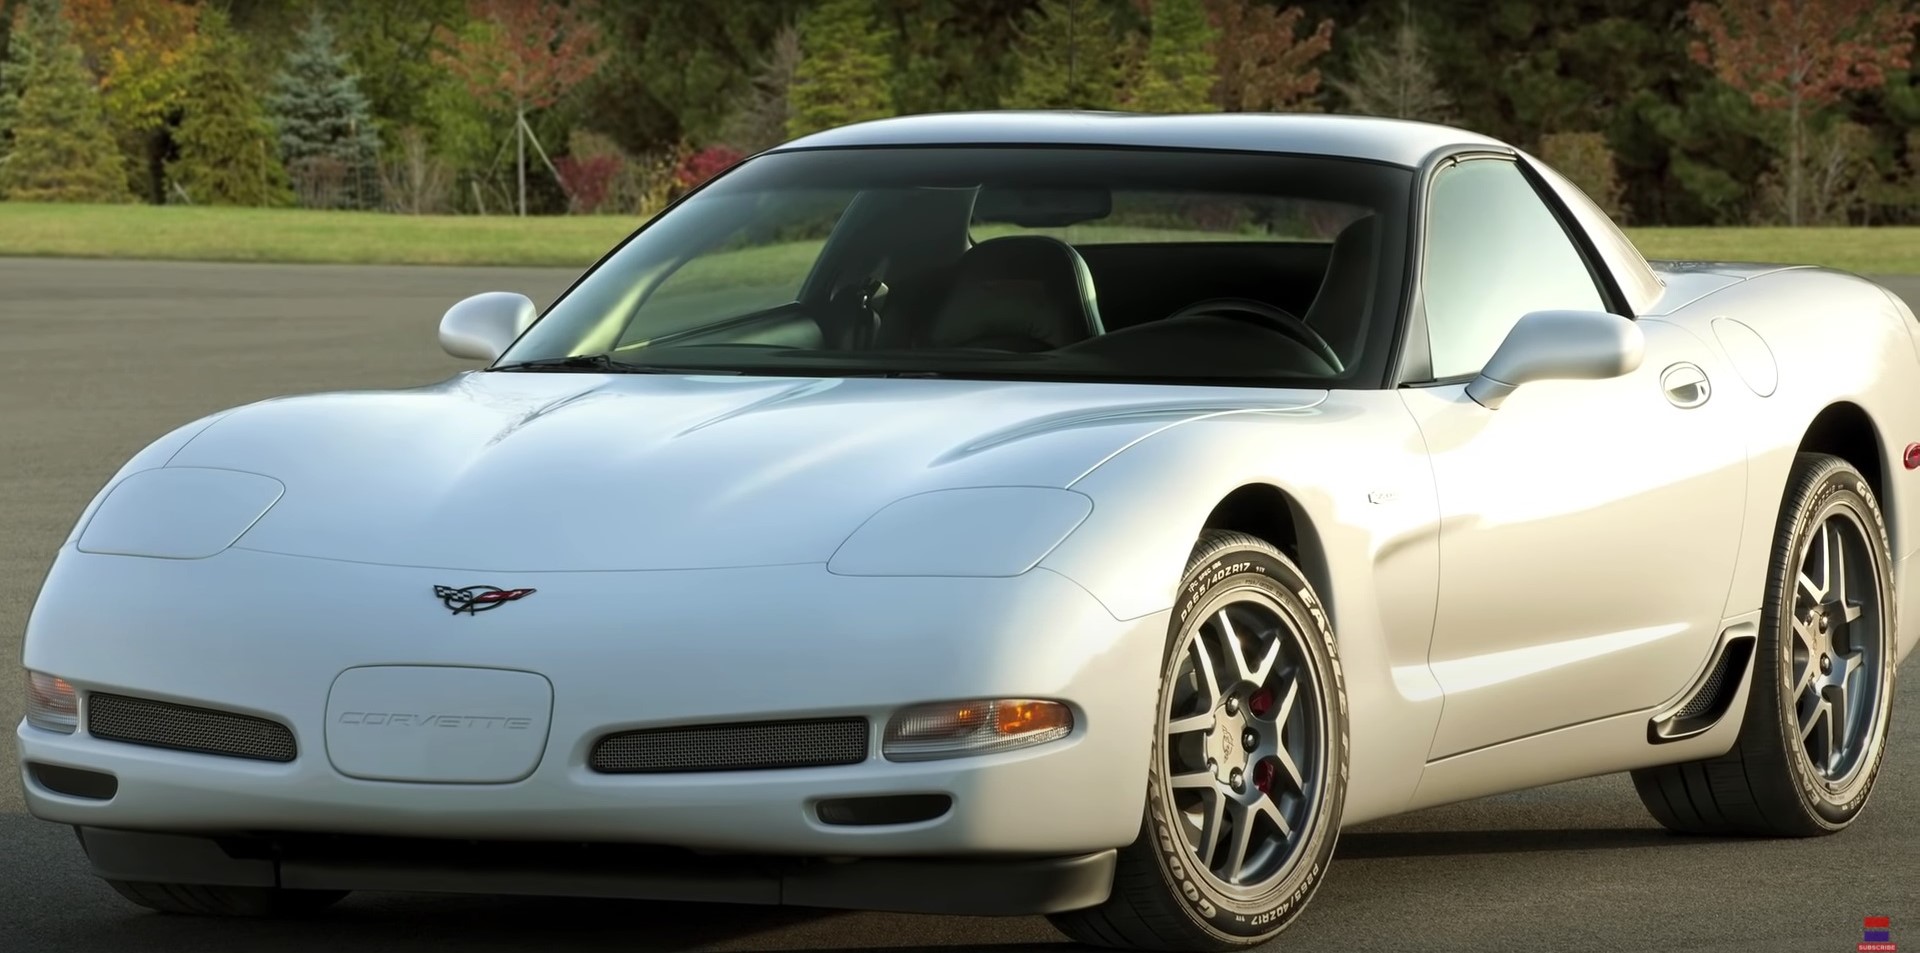 Things You Probably Didn't Know About The 2001 Chevrolet Corvette Z06